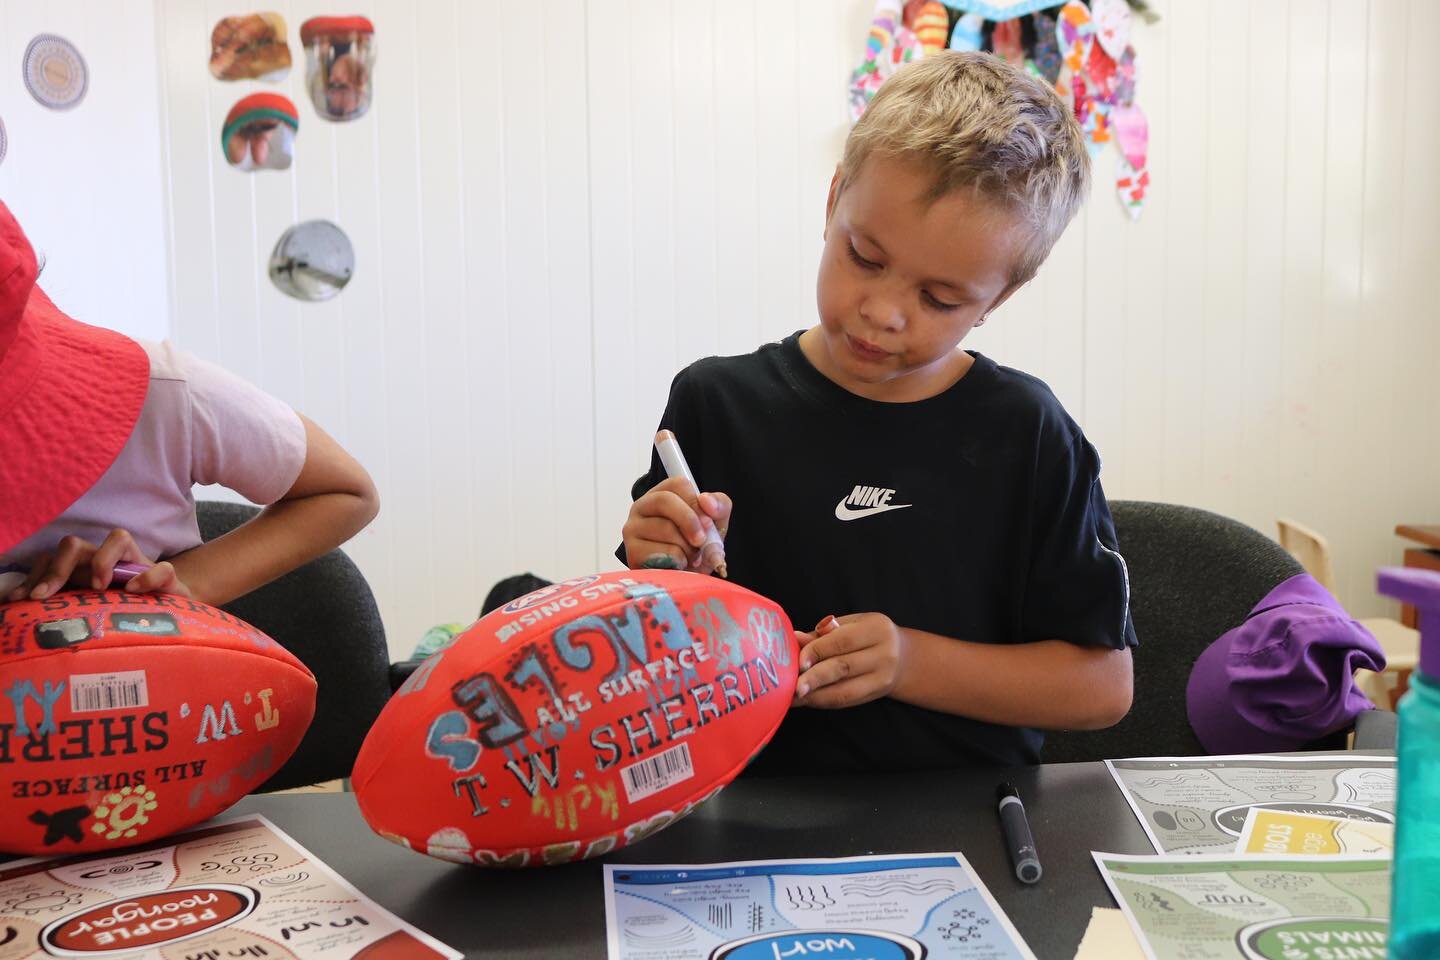 Footy season 😎 Today each child in the vacation care program received their own football to personalise and take home.